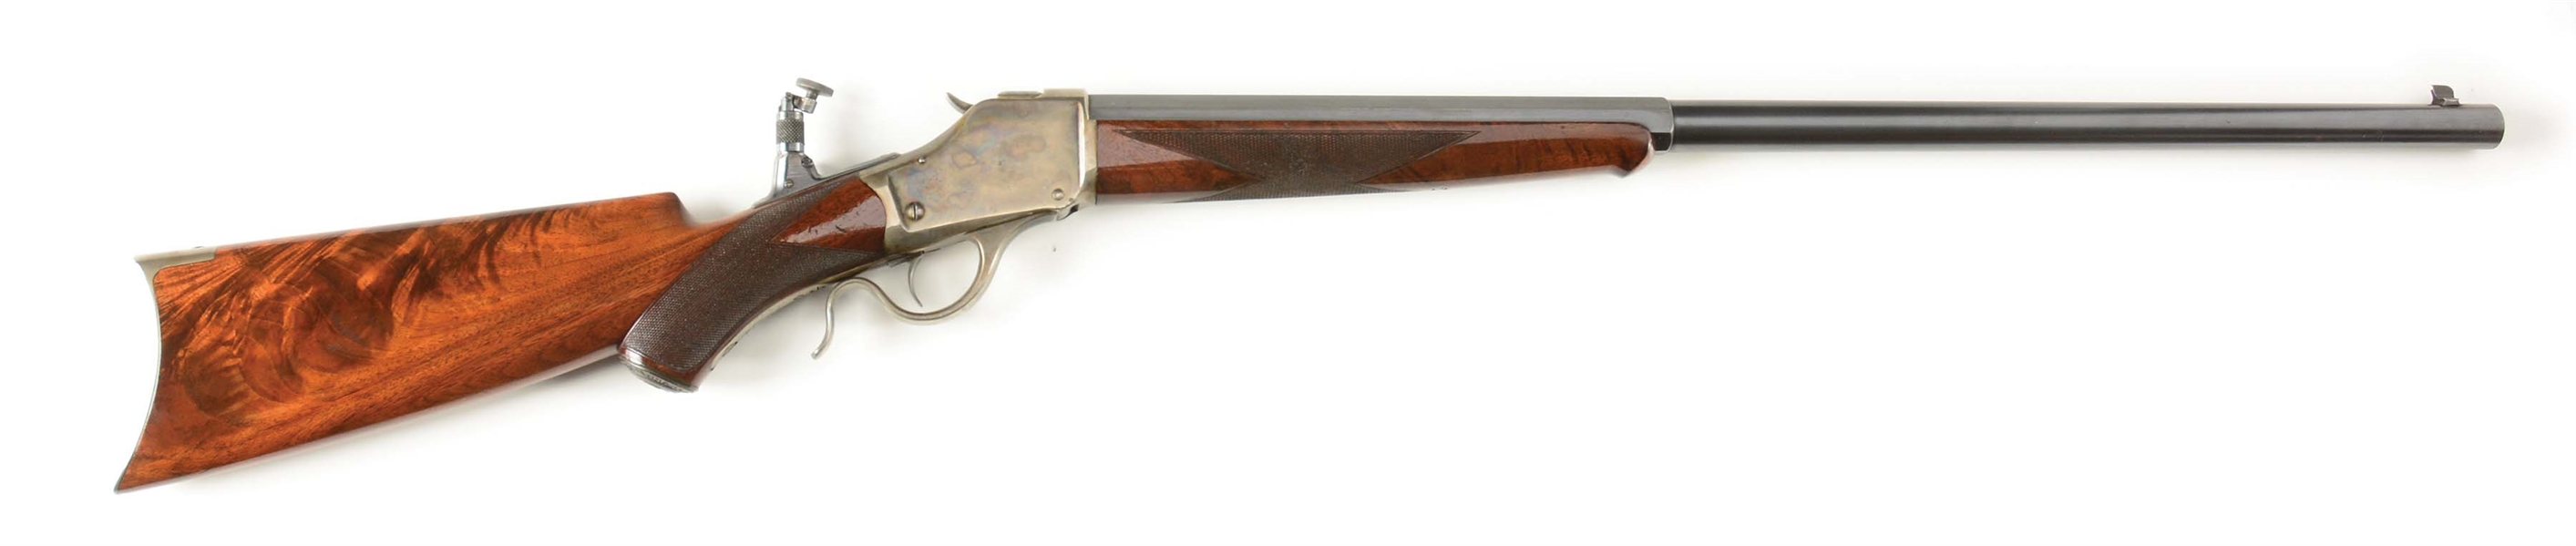 (A) VERY FINE CASE HARDENED WINCHESTER HI-WALL DELUXE SINGLE SHOT RIFLE WITH UNUSUAL LYMAN 15 TANG SIGHT.  